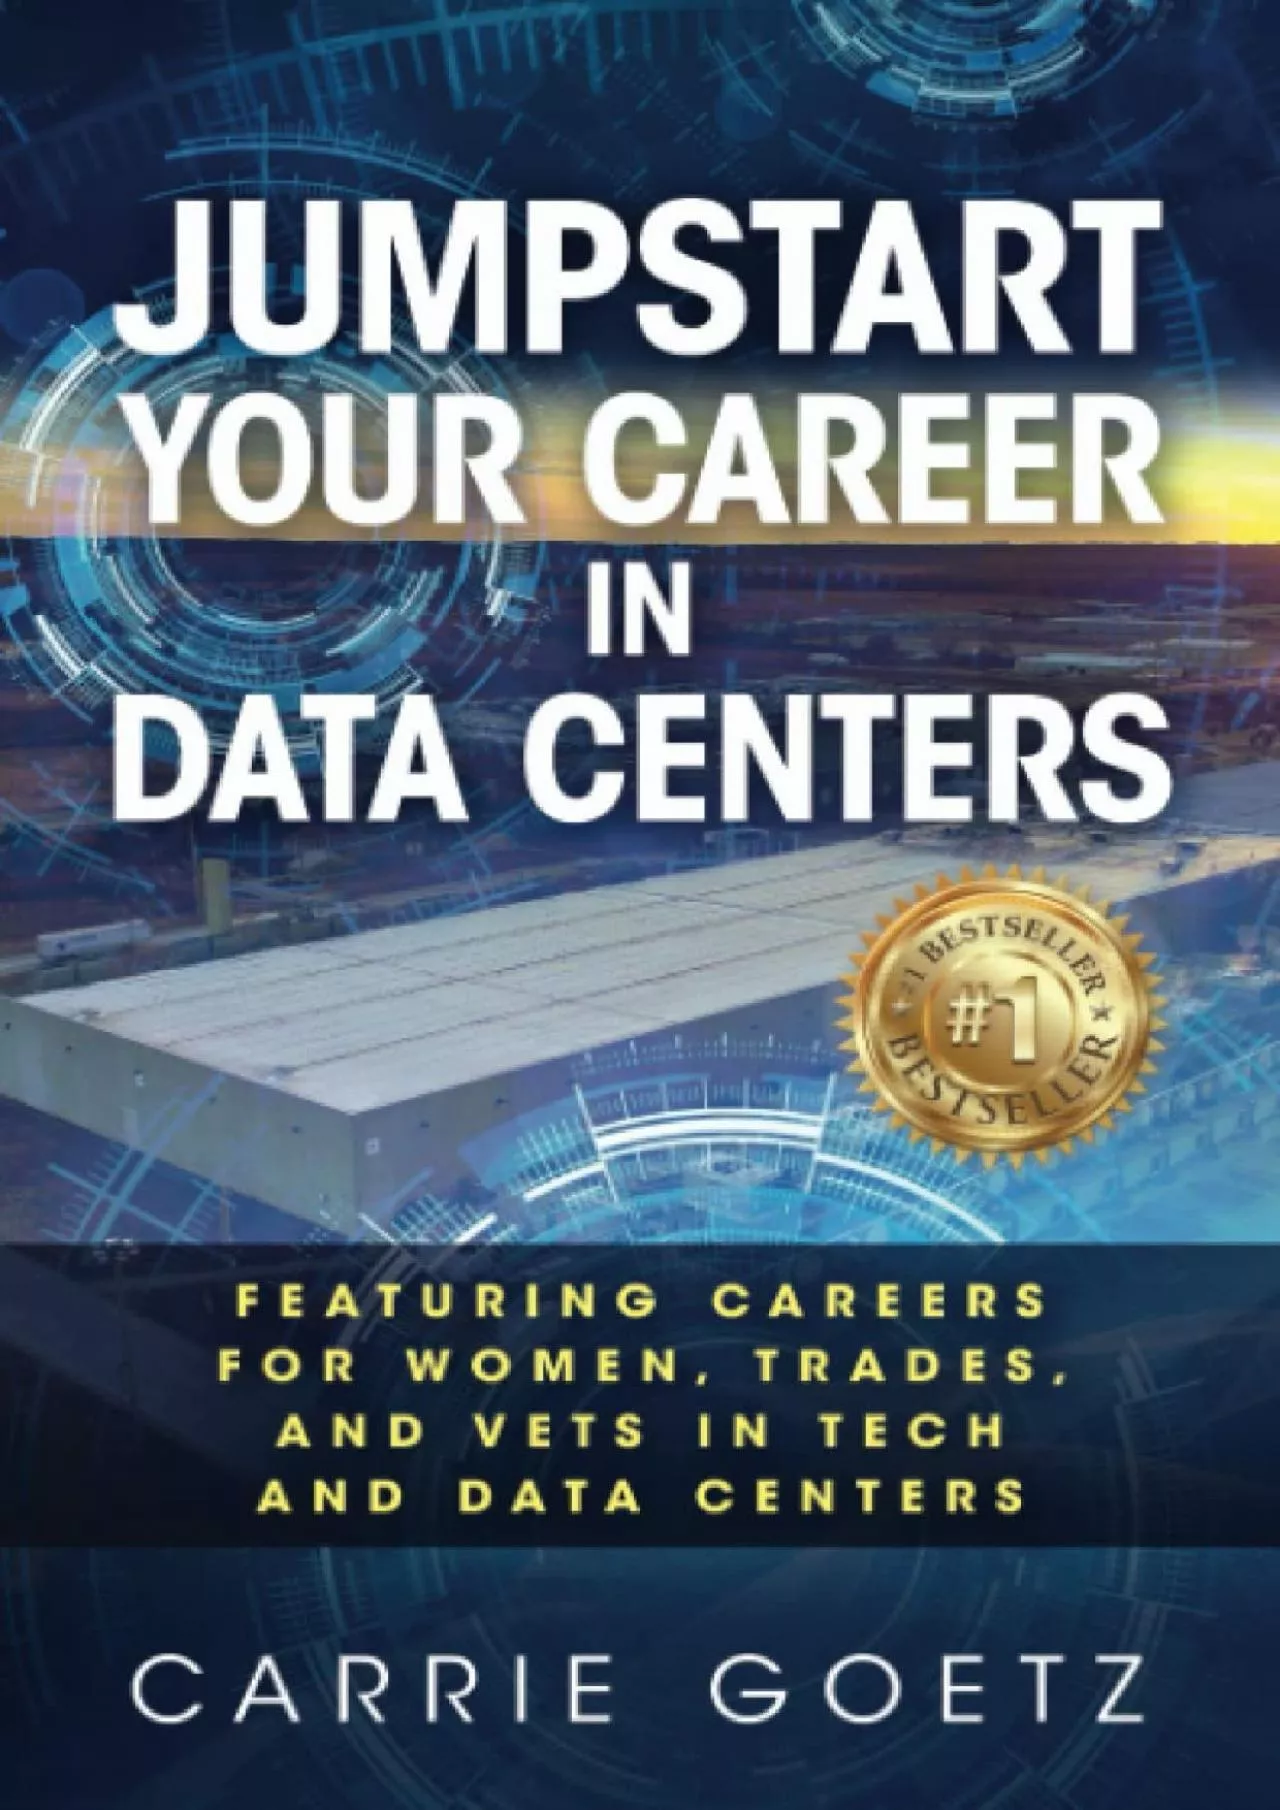 [READ] Jumpstart Your Career in Data Centers: Featuring Careers for Women, Trades, and